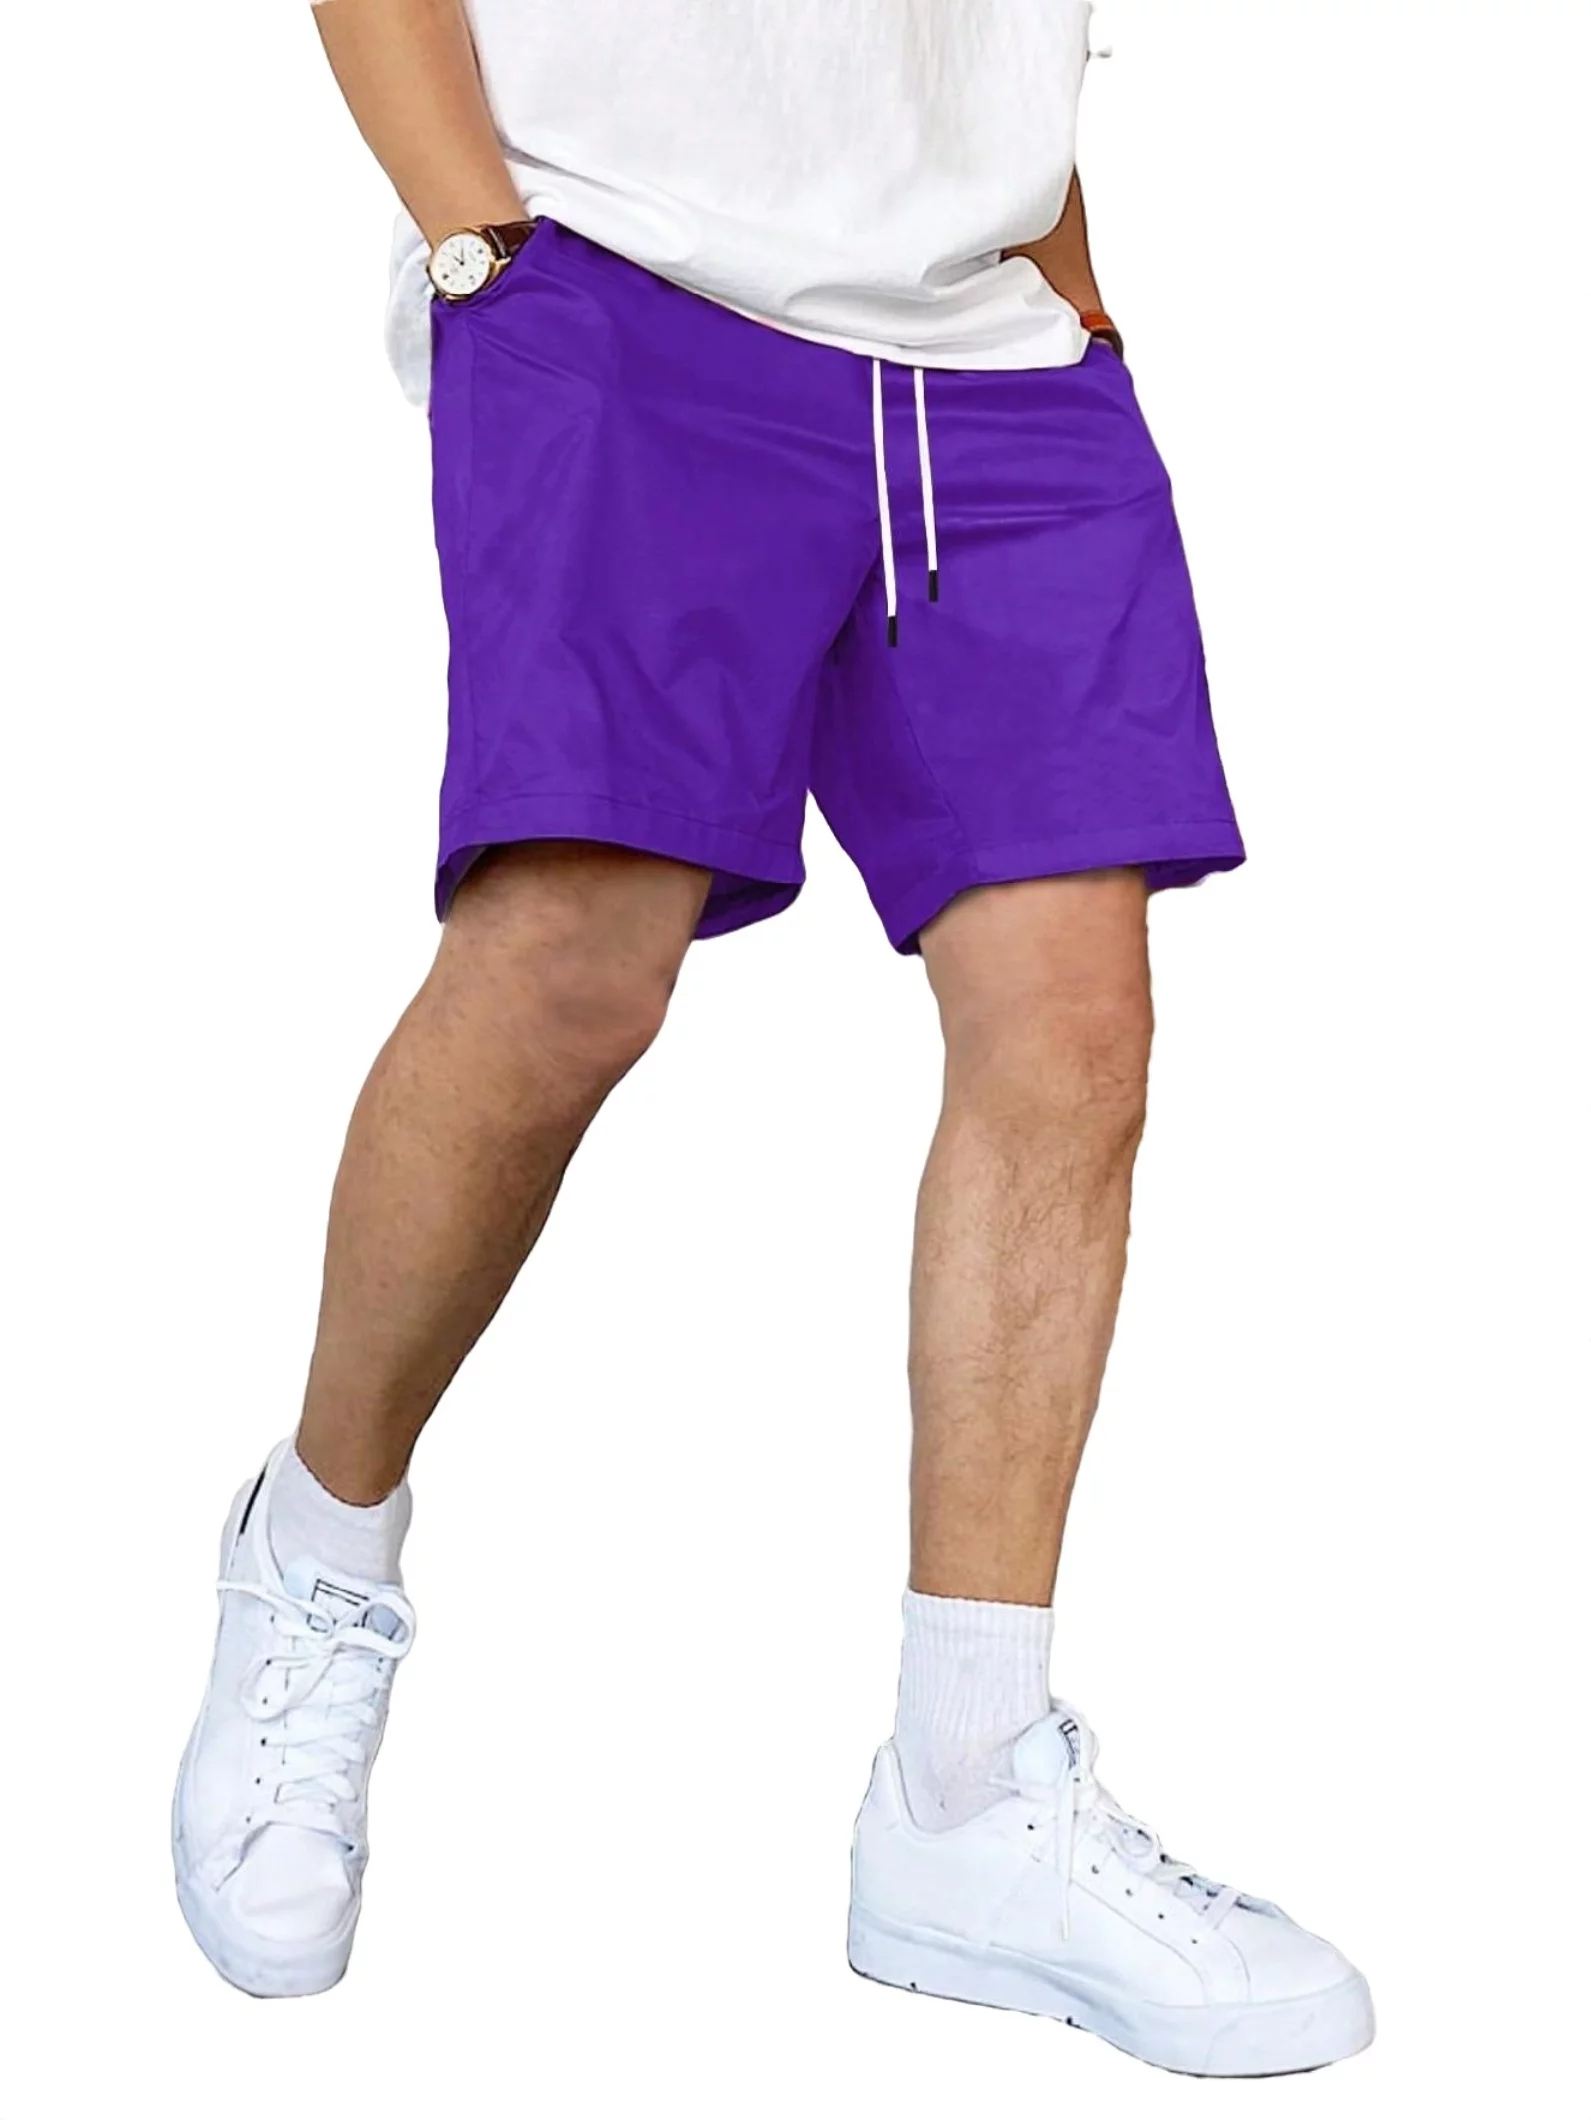 Men's purple shorts can be a versatile and stylish addition to your wardrobe. The vibrant color offers a unique and eye-catching